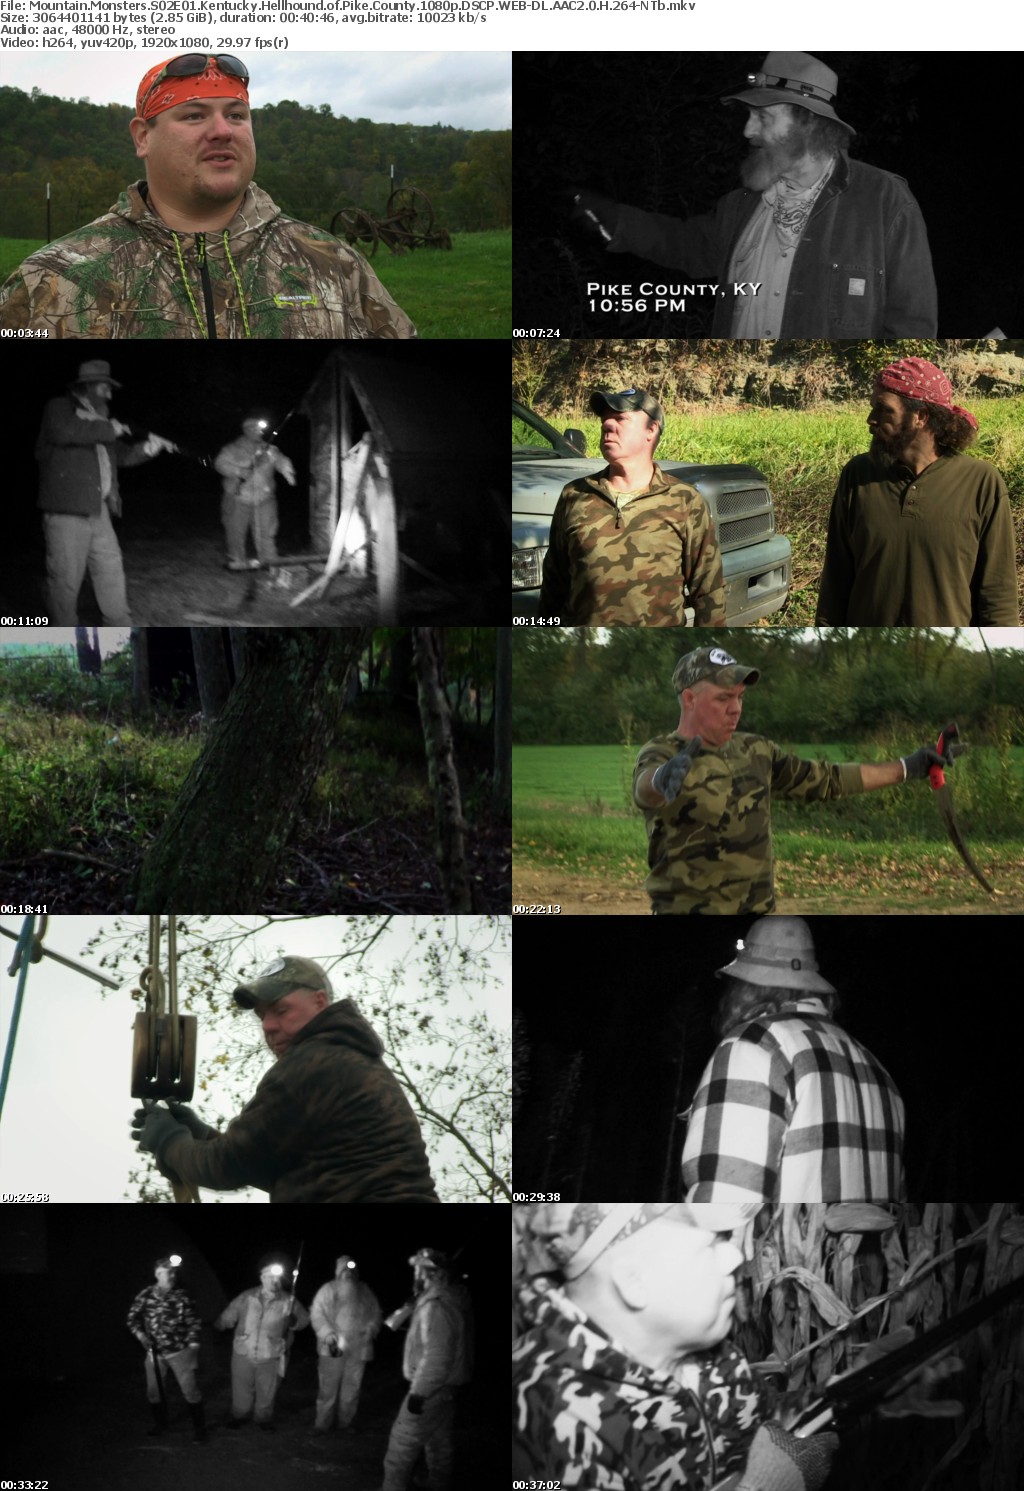 Mountain Monsters S02E01 Kentucky Hellhound of Pike County 1080p DSCP WEB-DL AAC2 0 H 264-NTb